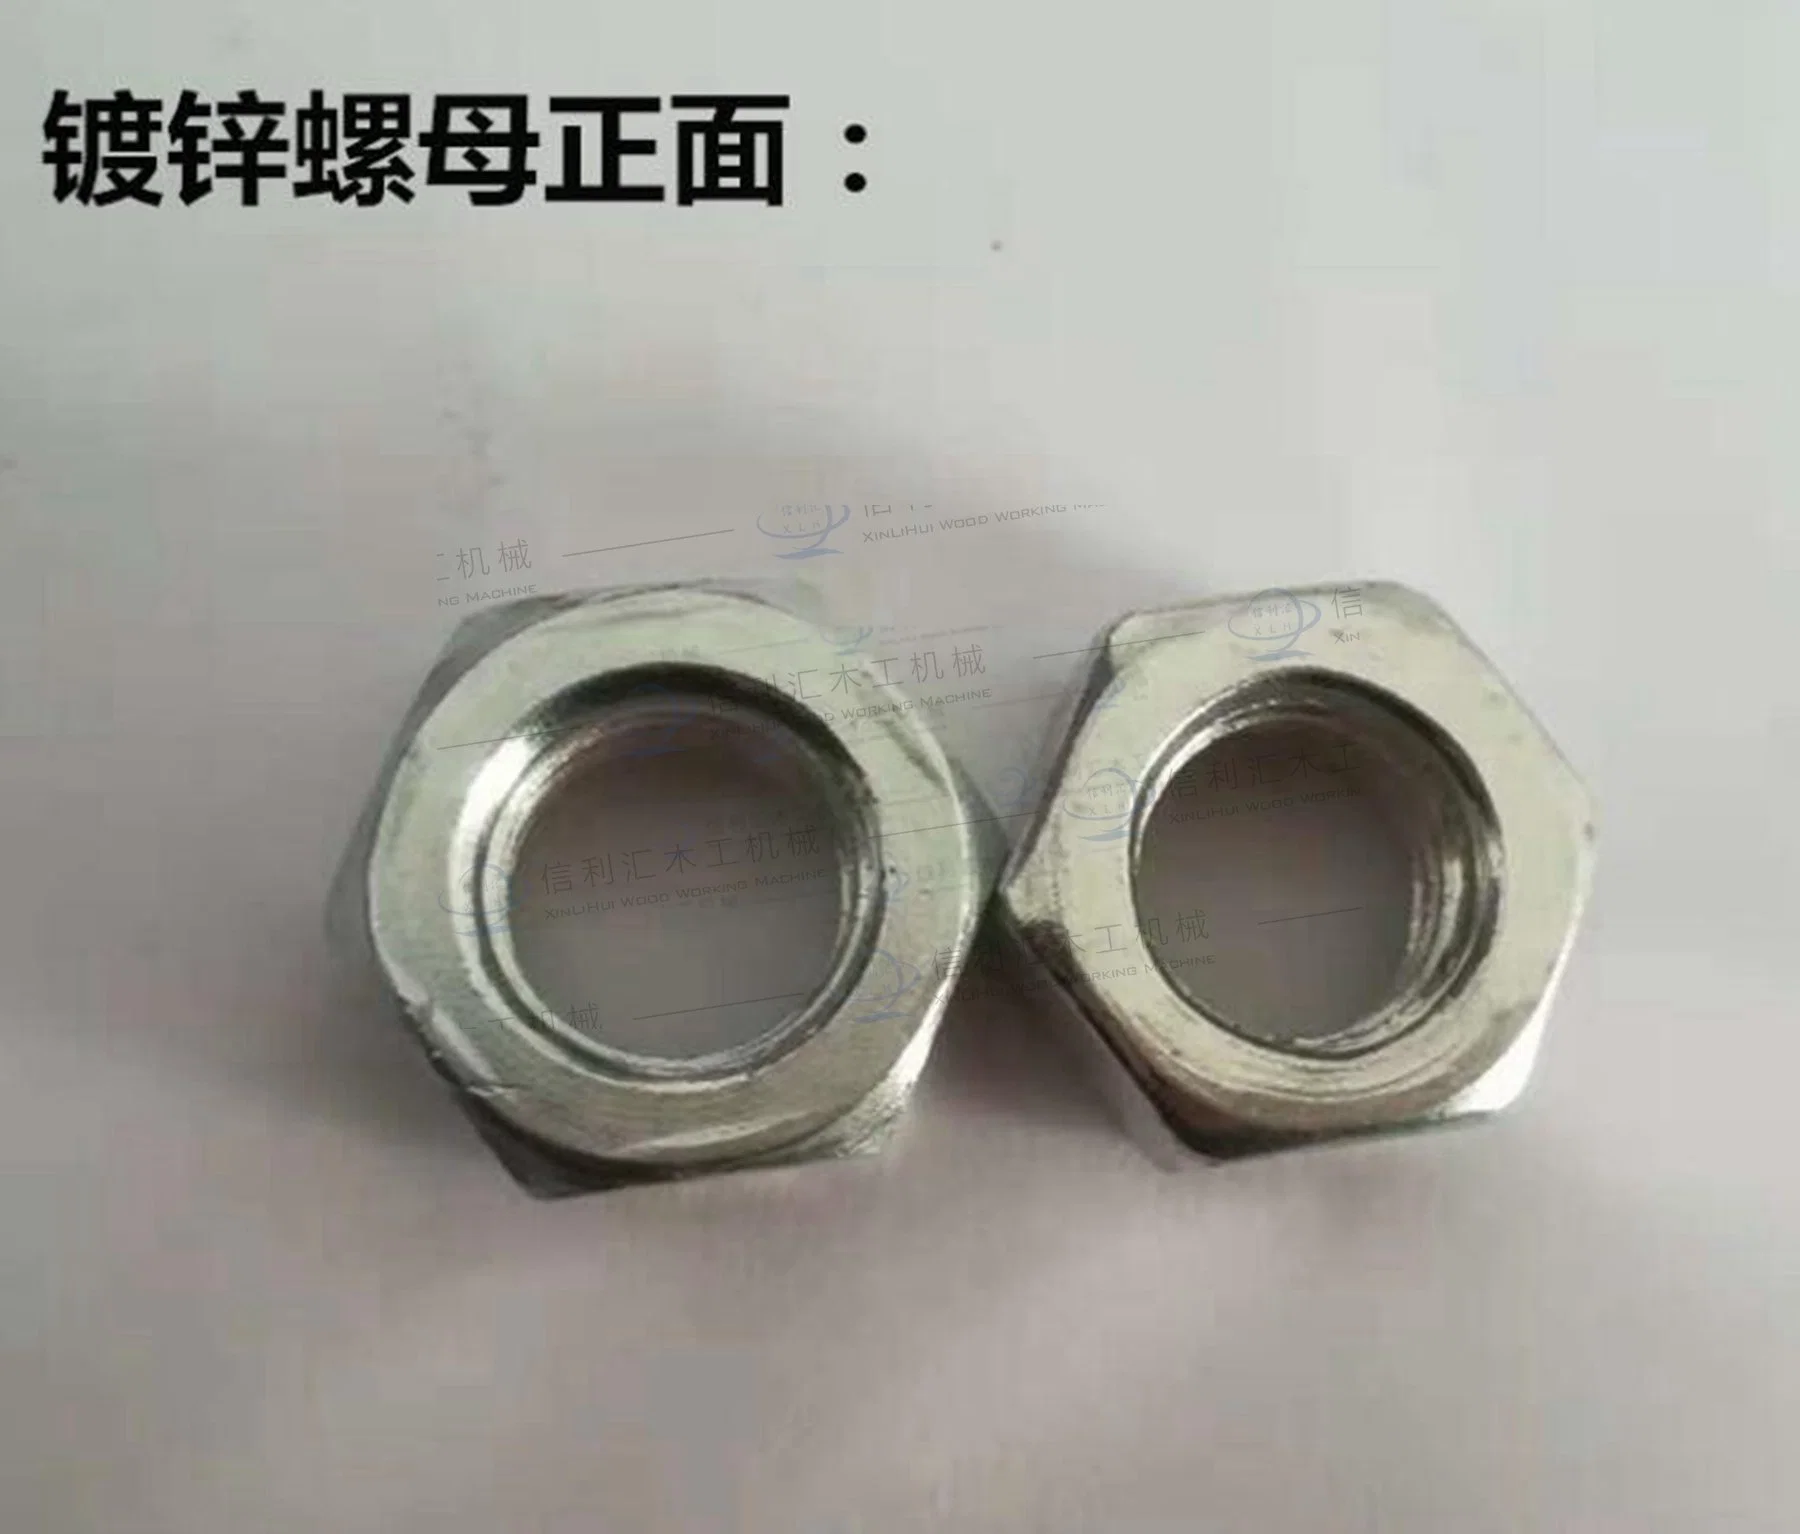 China Wholesale/Supplier Custom Heavy Carbon Steel Stainless Black Insert Thin Hexagon Head Nut and Bolt DIN934 Galvanized M6 M5 Hex Nut